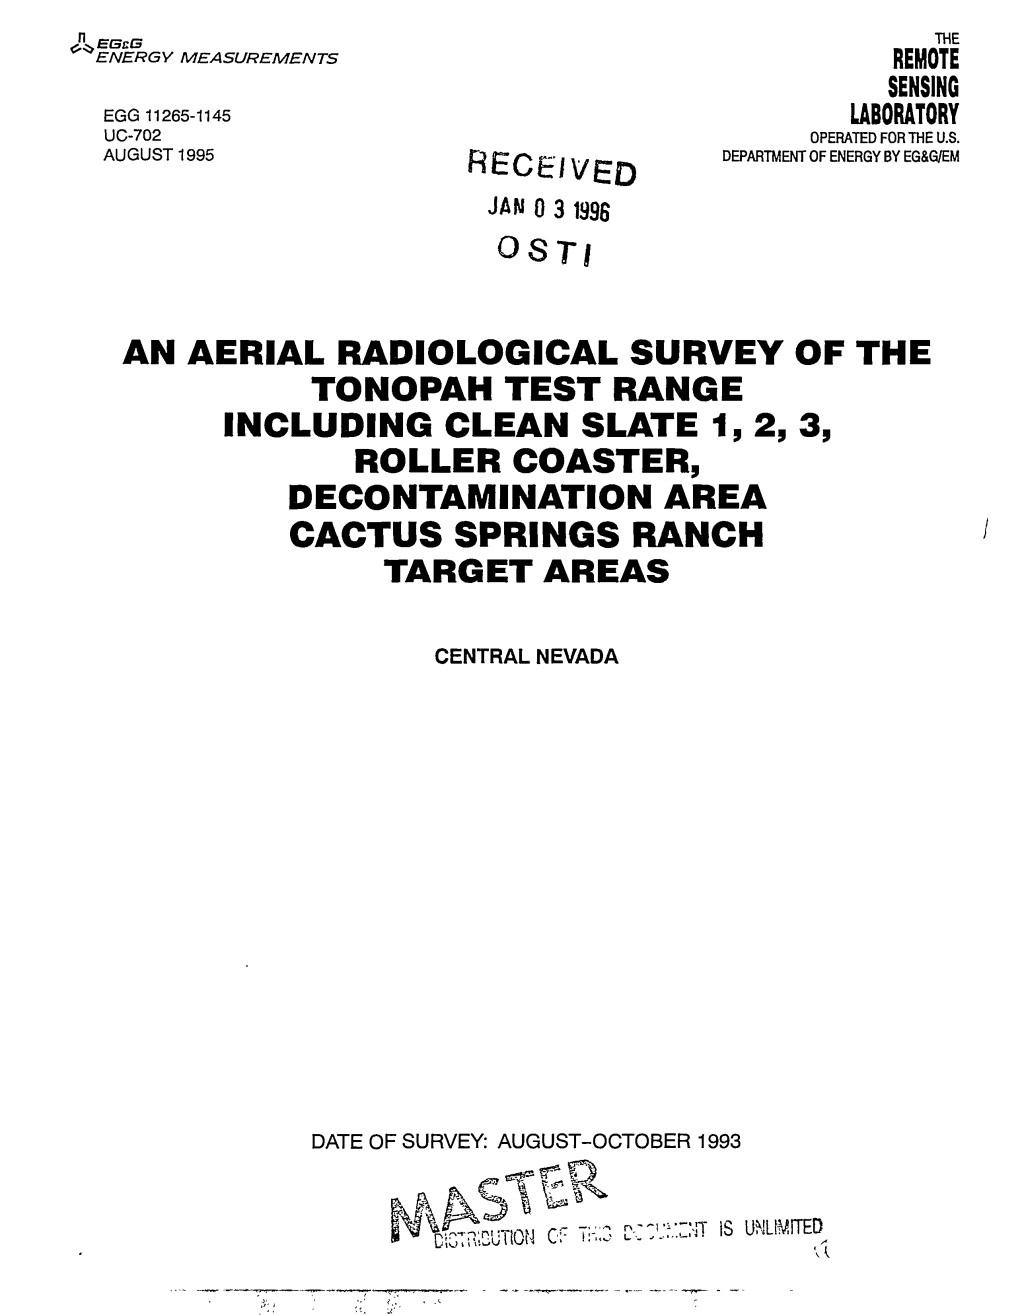 An Aerial Radiological Survey of the Tonopah Test Range Including Clean Slate 1, 2, 3, Roller Coaster, Decontamination Area Cactus Springs Ranch Target Areas